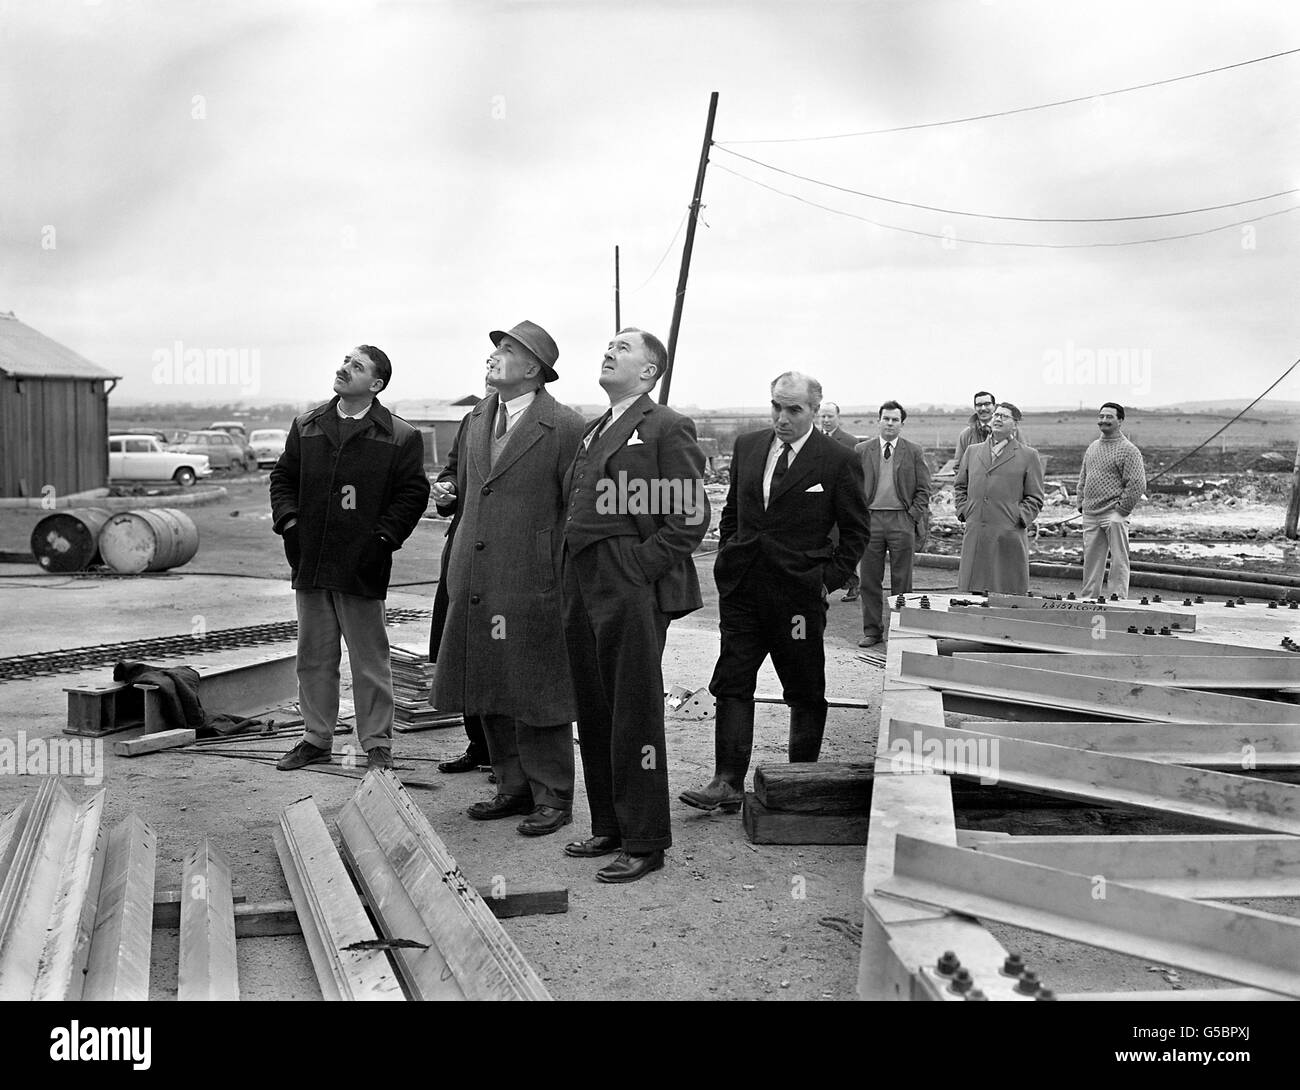 750,000 radio telescope under construction for the General Post Office at Goonhilly Down, near the Lizard. With him are P. Goodall (left, the resident engineer, and H.C Husband, designer of the telescope (he also designed the instrument at Jodrell Bank). The Goonhilly Down radio telescope is to be used in transatlantic television experiments. Stock Photo